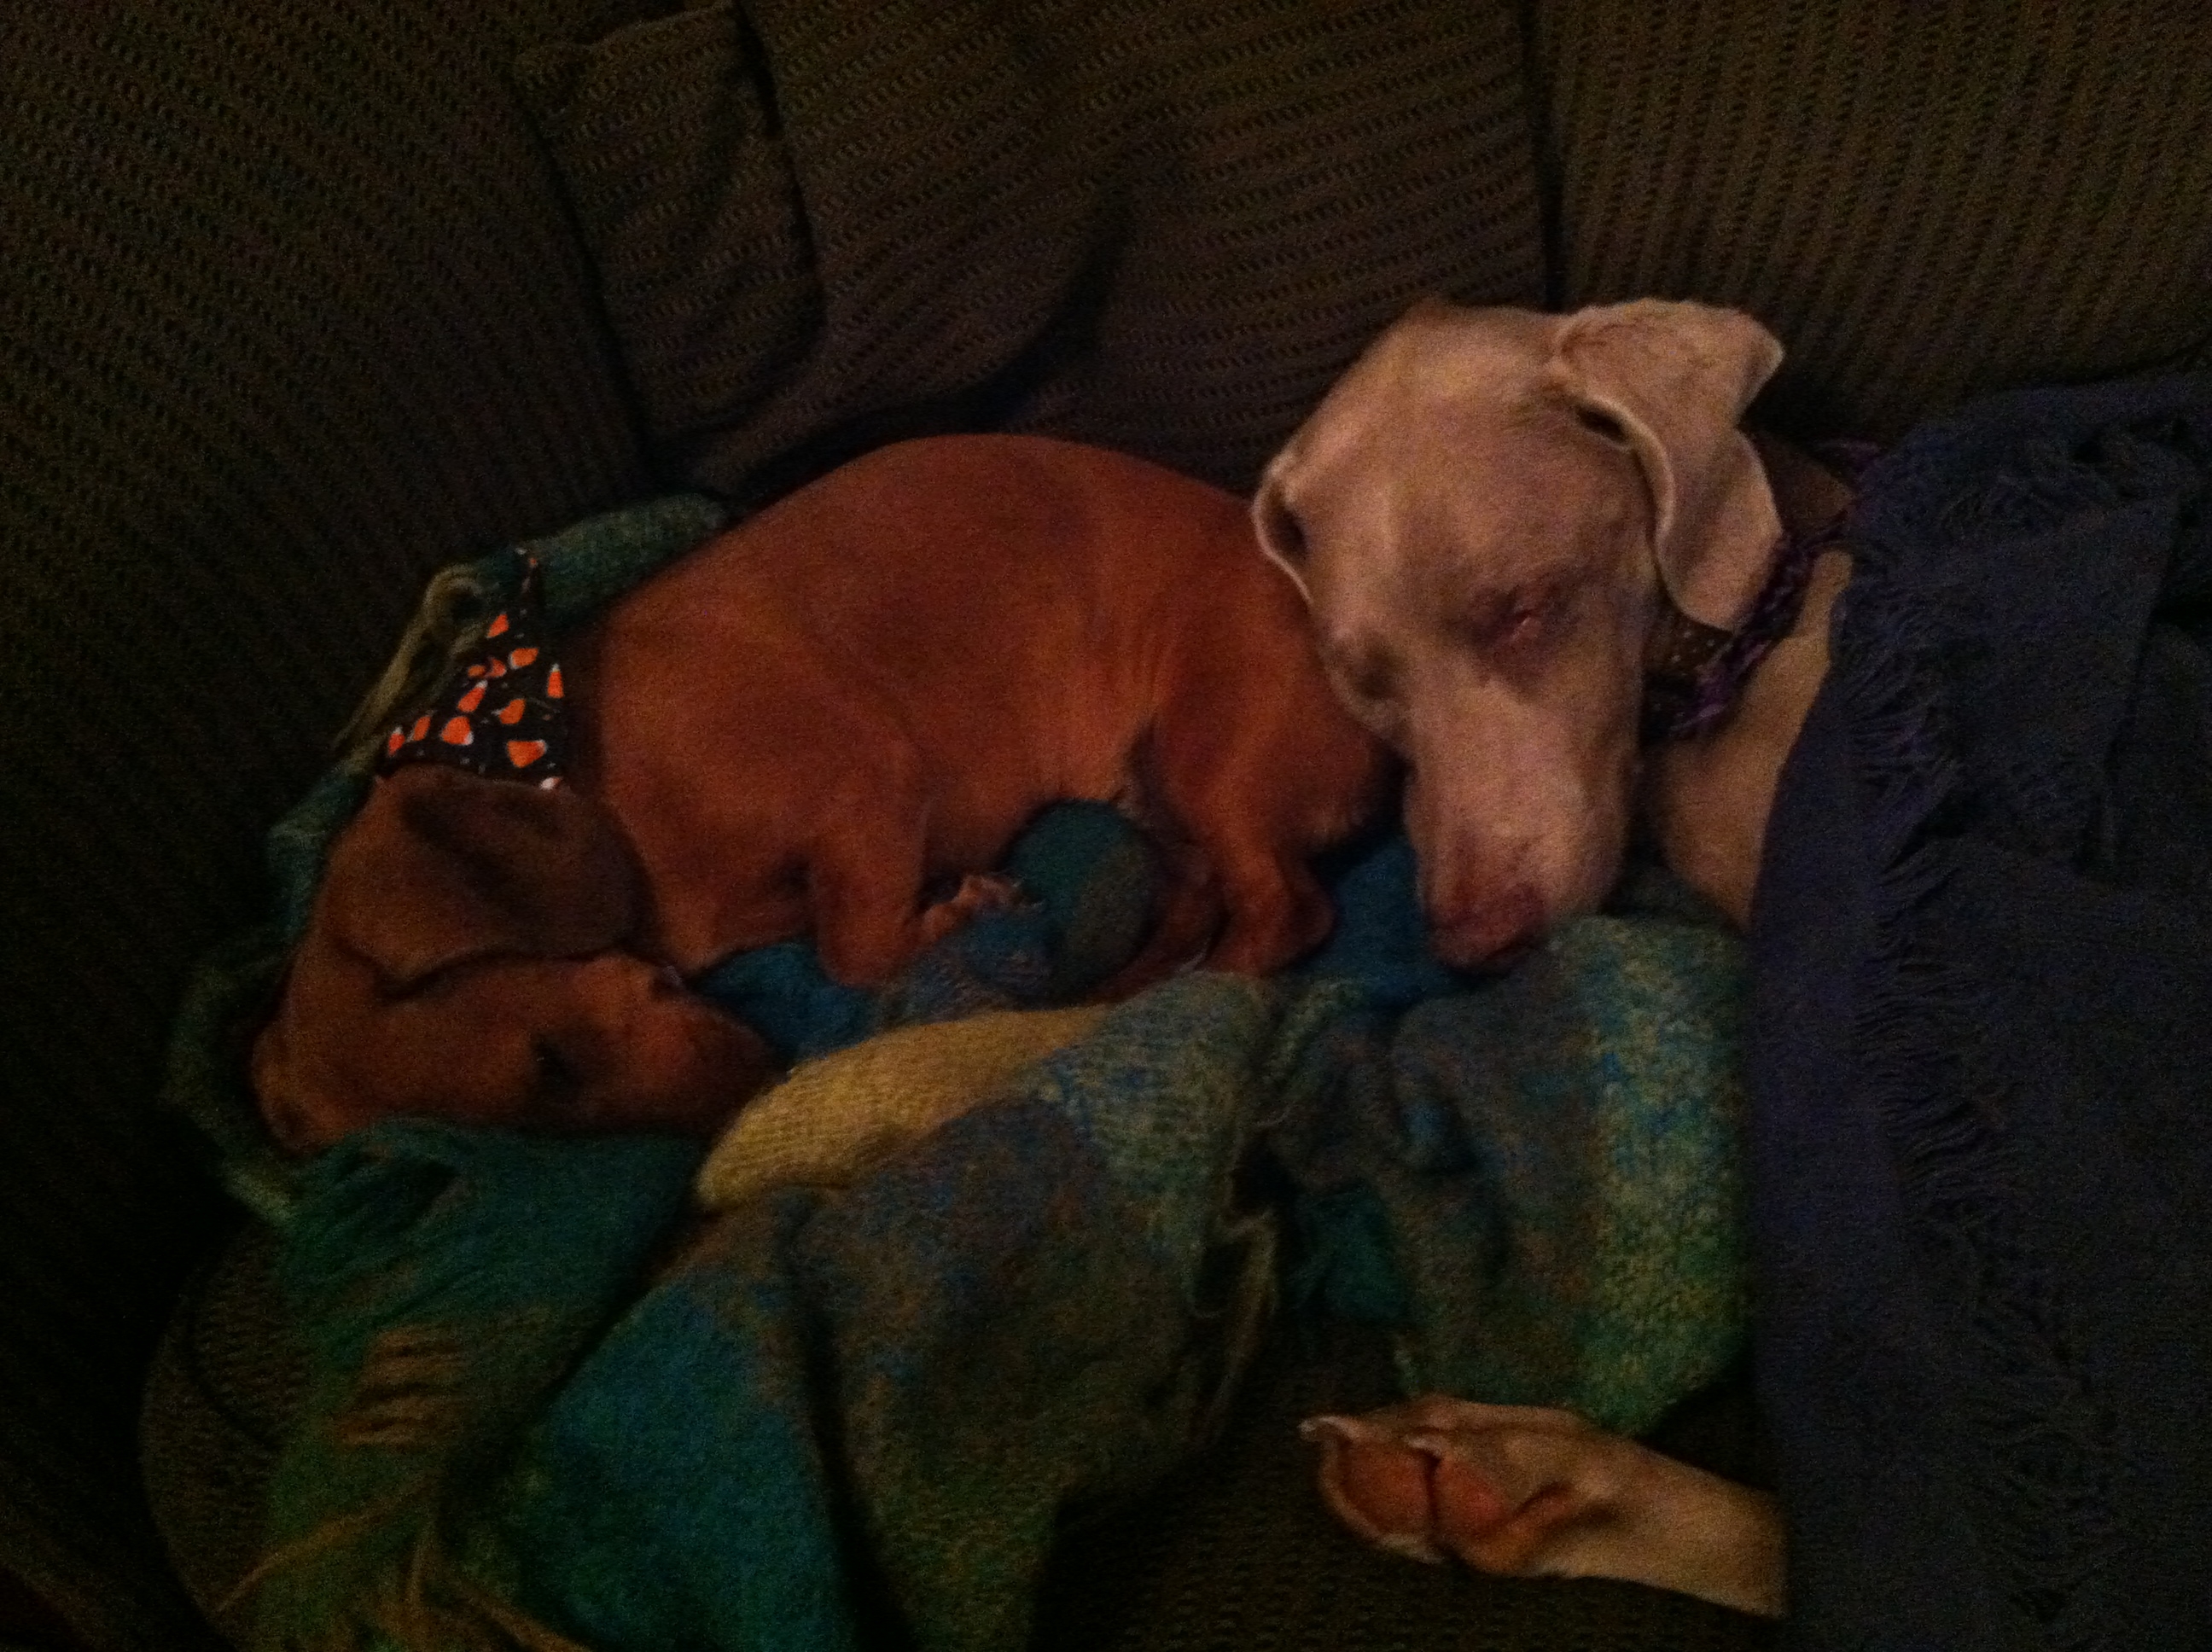 Sugarland is the min dachshund. Emma is the weimaraner, who is clearly enjoying the relaxed rules of hospice. 